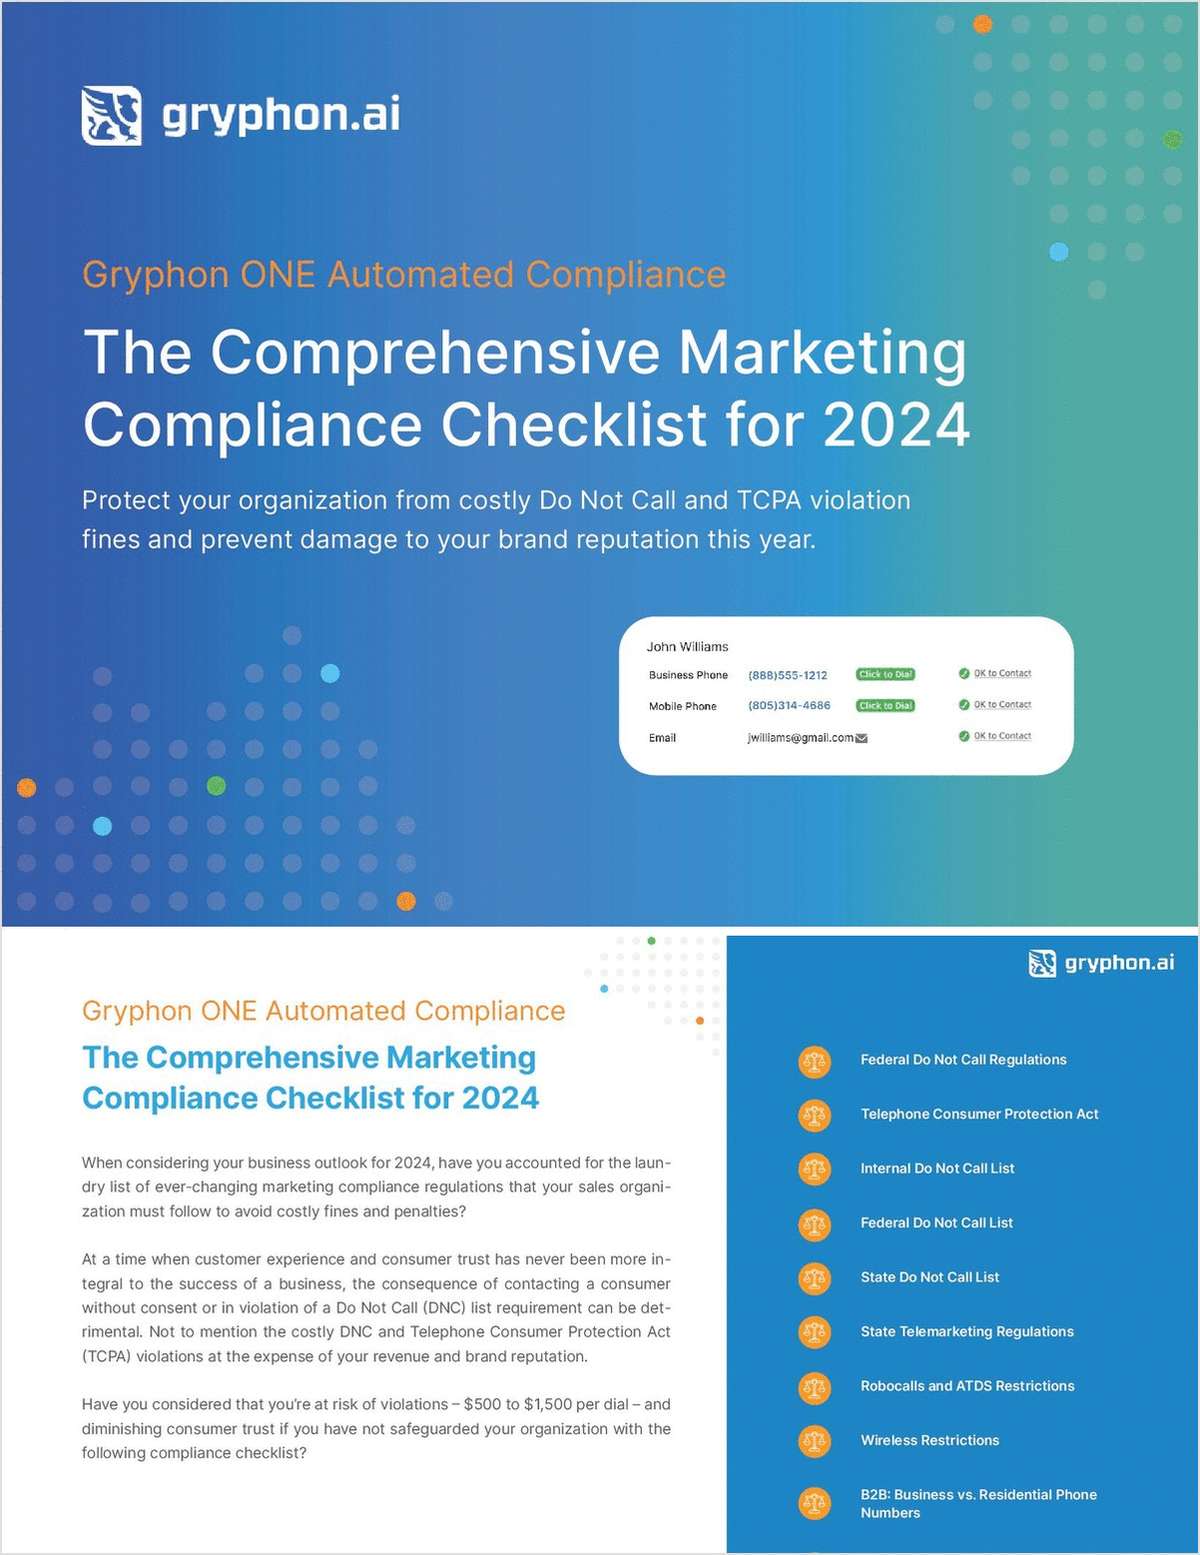 The Comprehensive Marketing Compliance Checklist for 2024 link